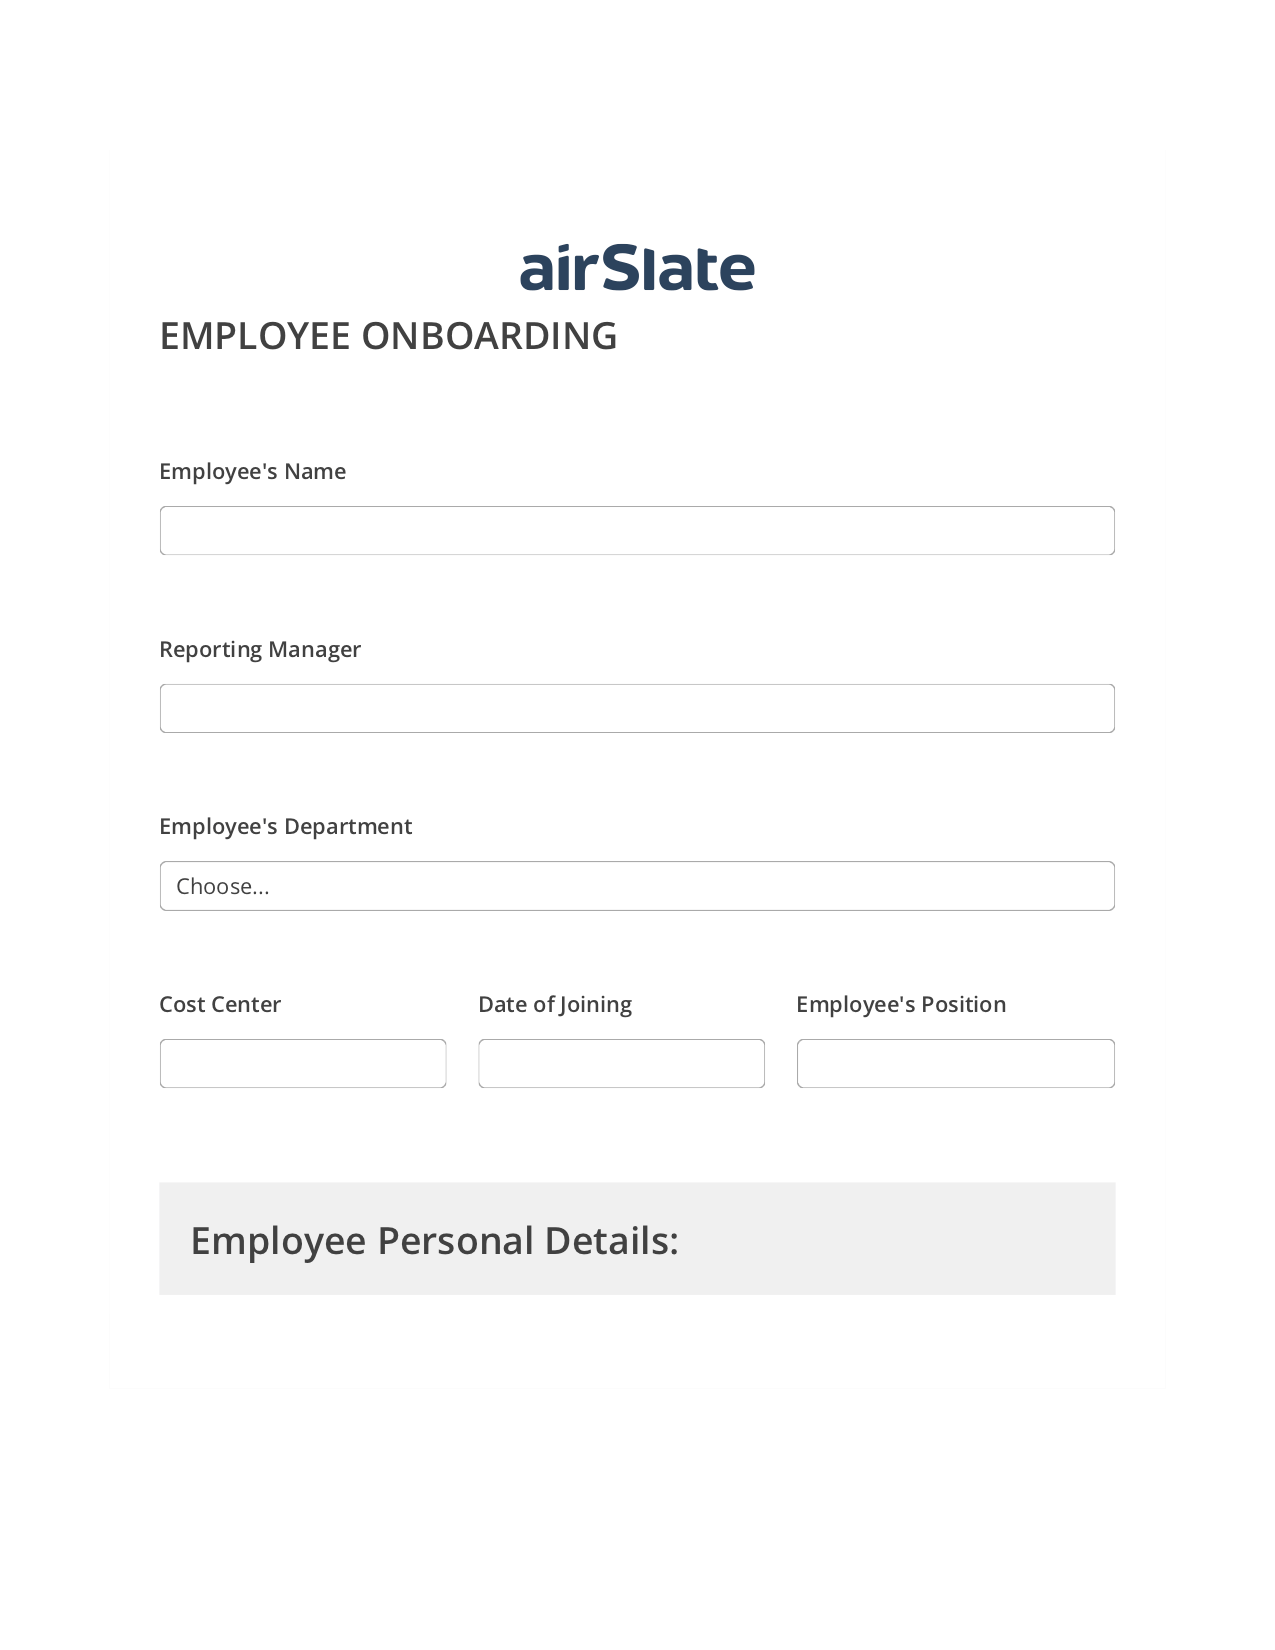 Employee Onboarding Workflow Pre-fill from CSV File Dropdown Options Bot, Create NetSuite Record bot, Post-finish Document Bot